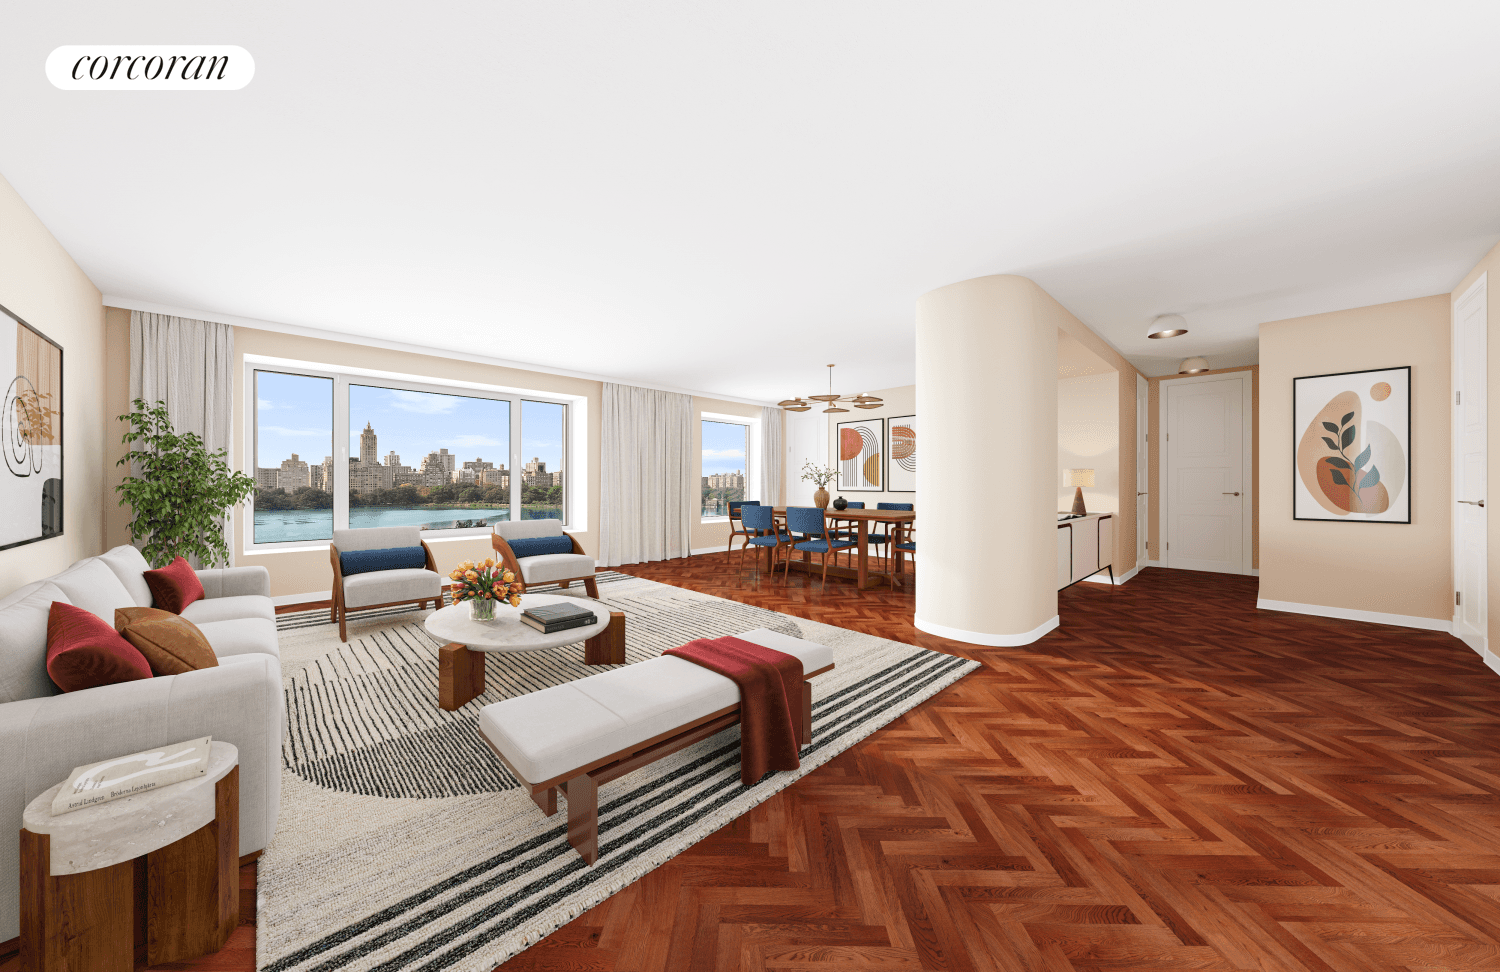 Welcome to apartment 12C at 1080 Fifth Avenue, an exquisite residence nestled in the prestigious Carnegie Hill neighborhood of the Upper East Side.